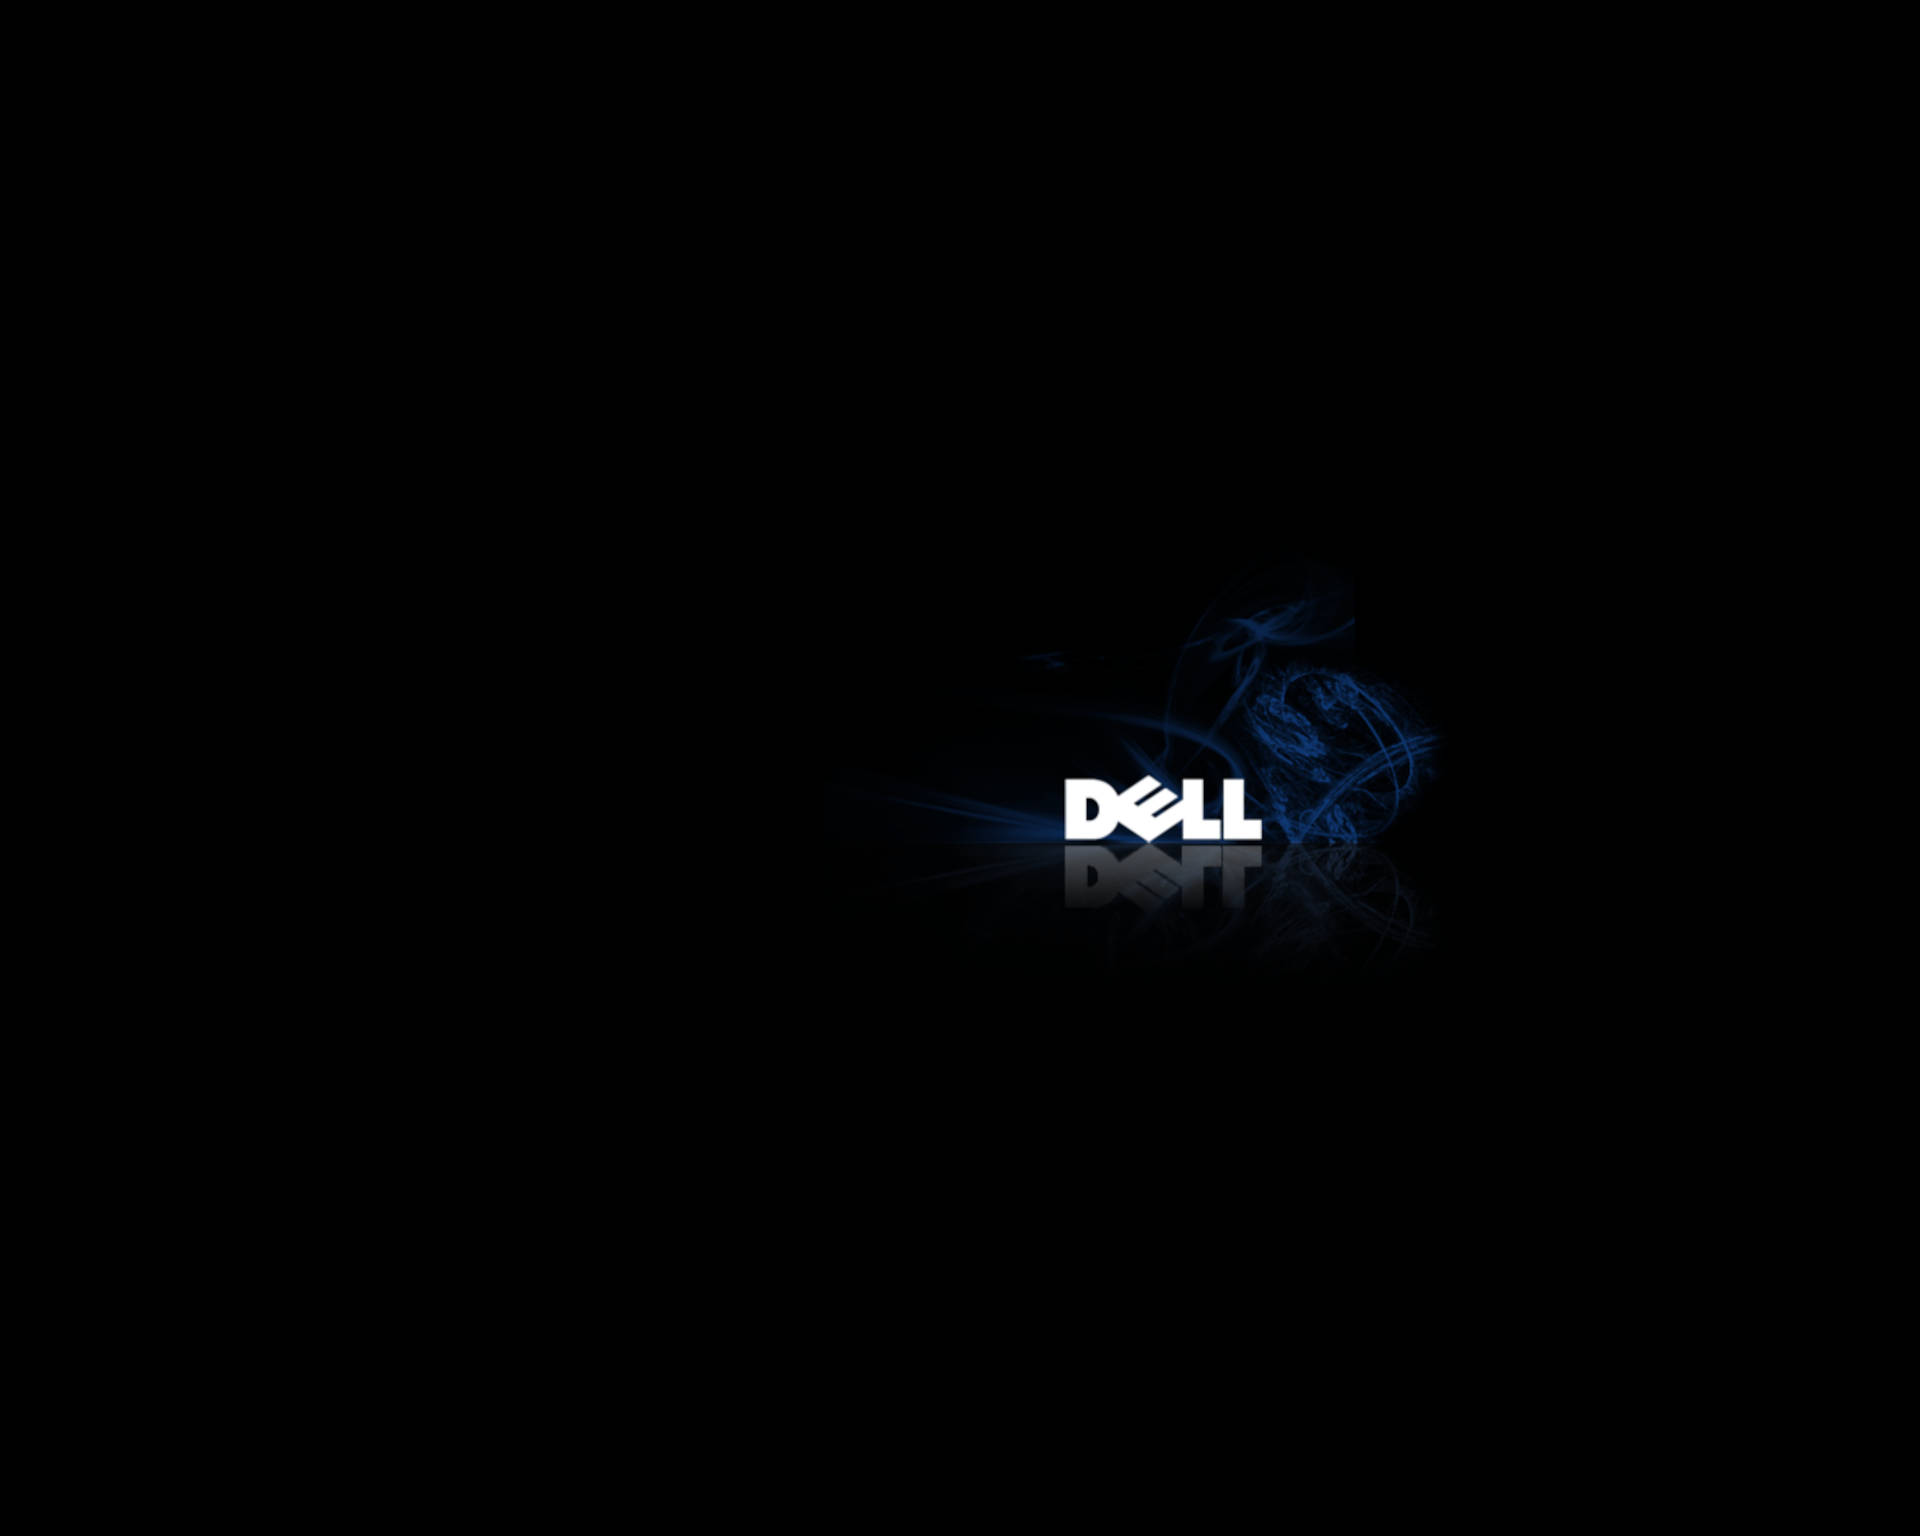 Dell 4k Logo With Smoke Background